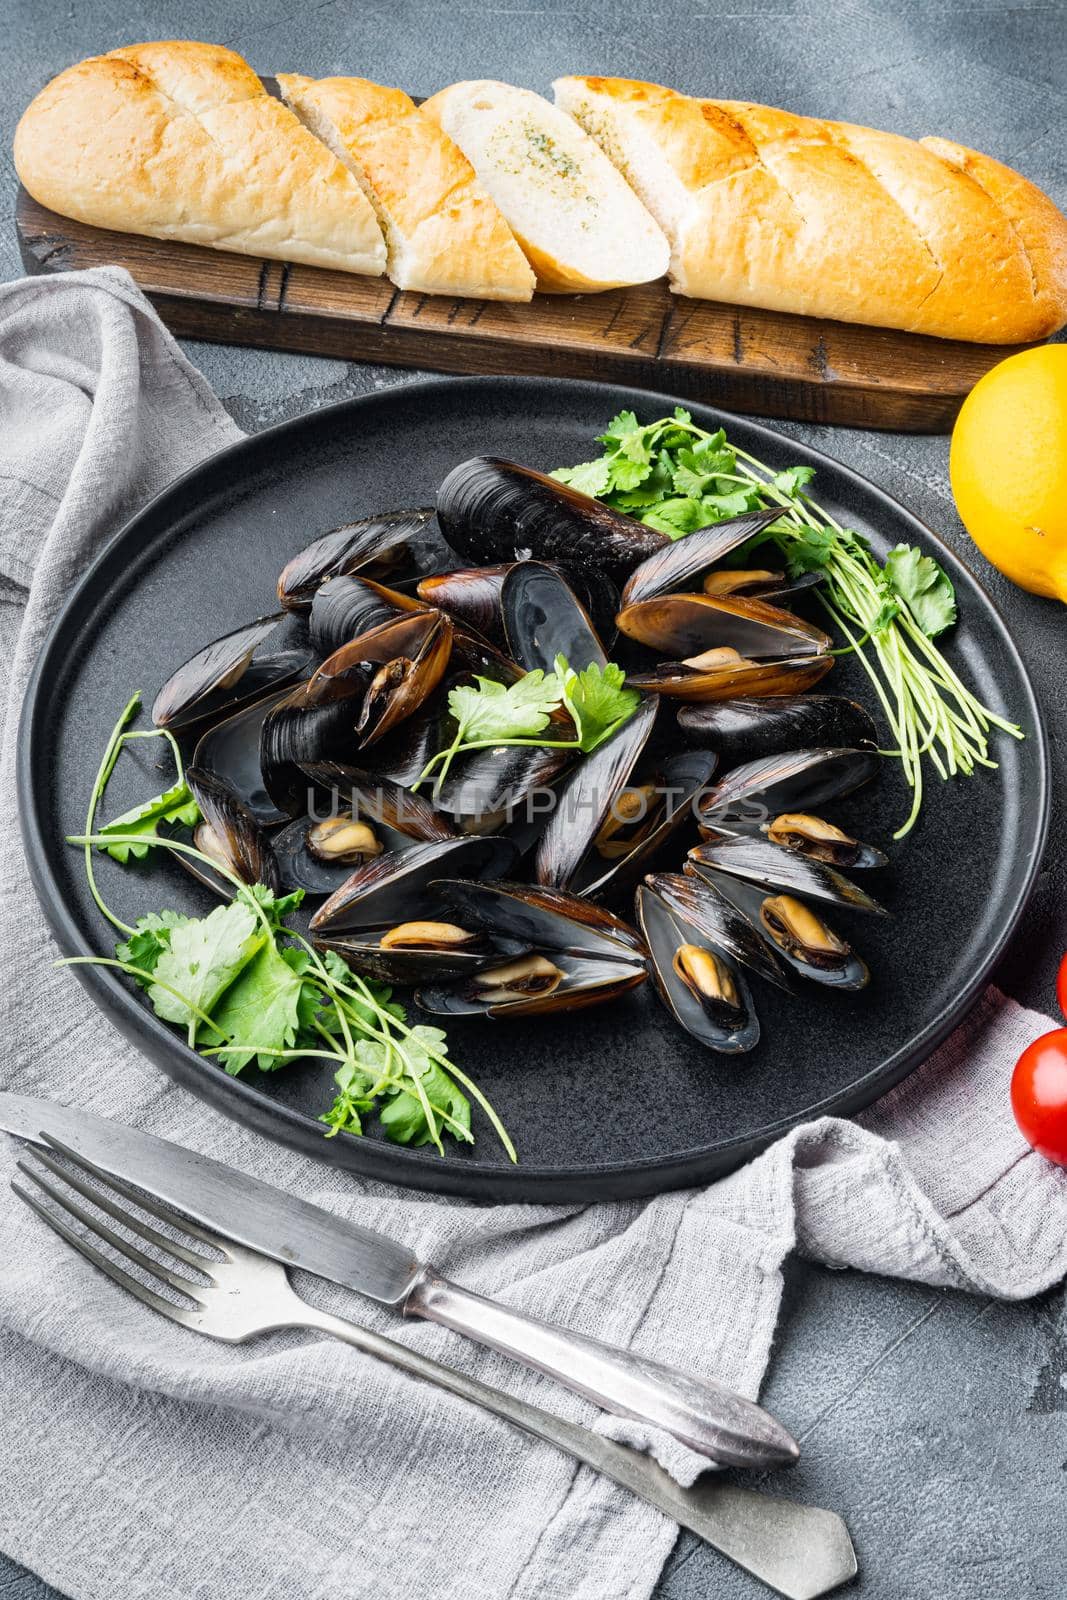 Steamed mussels in white wine set, on plate, on gray background